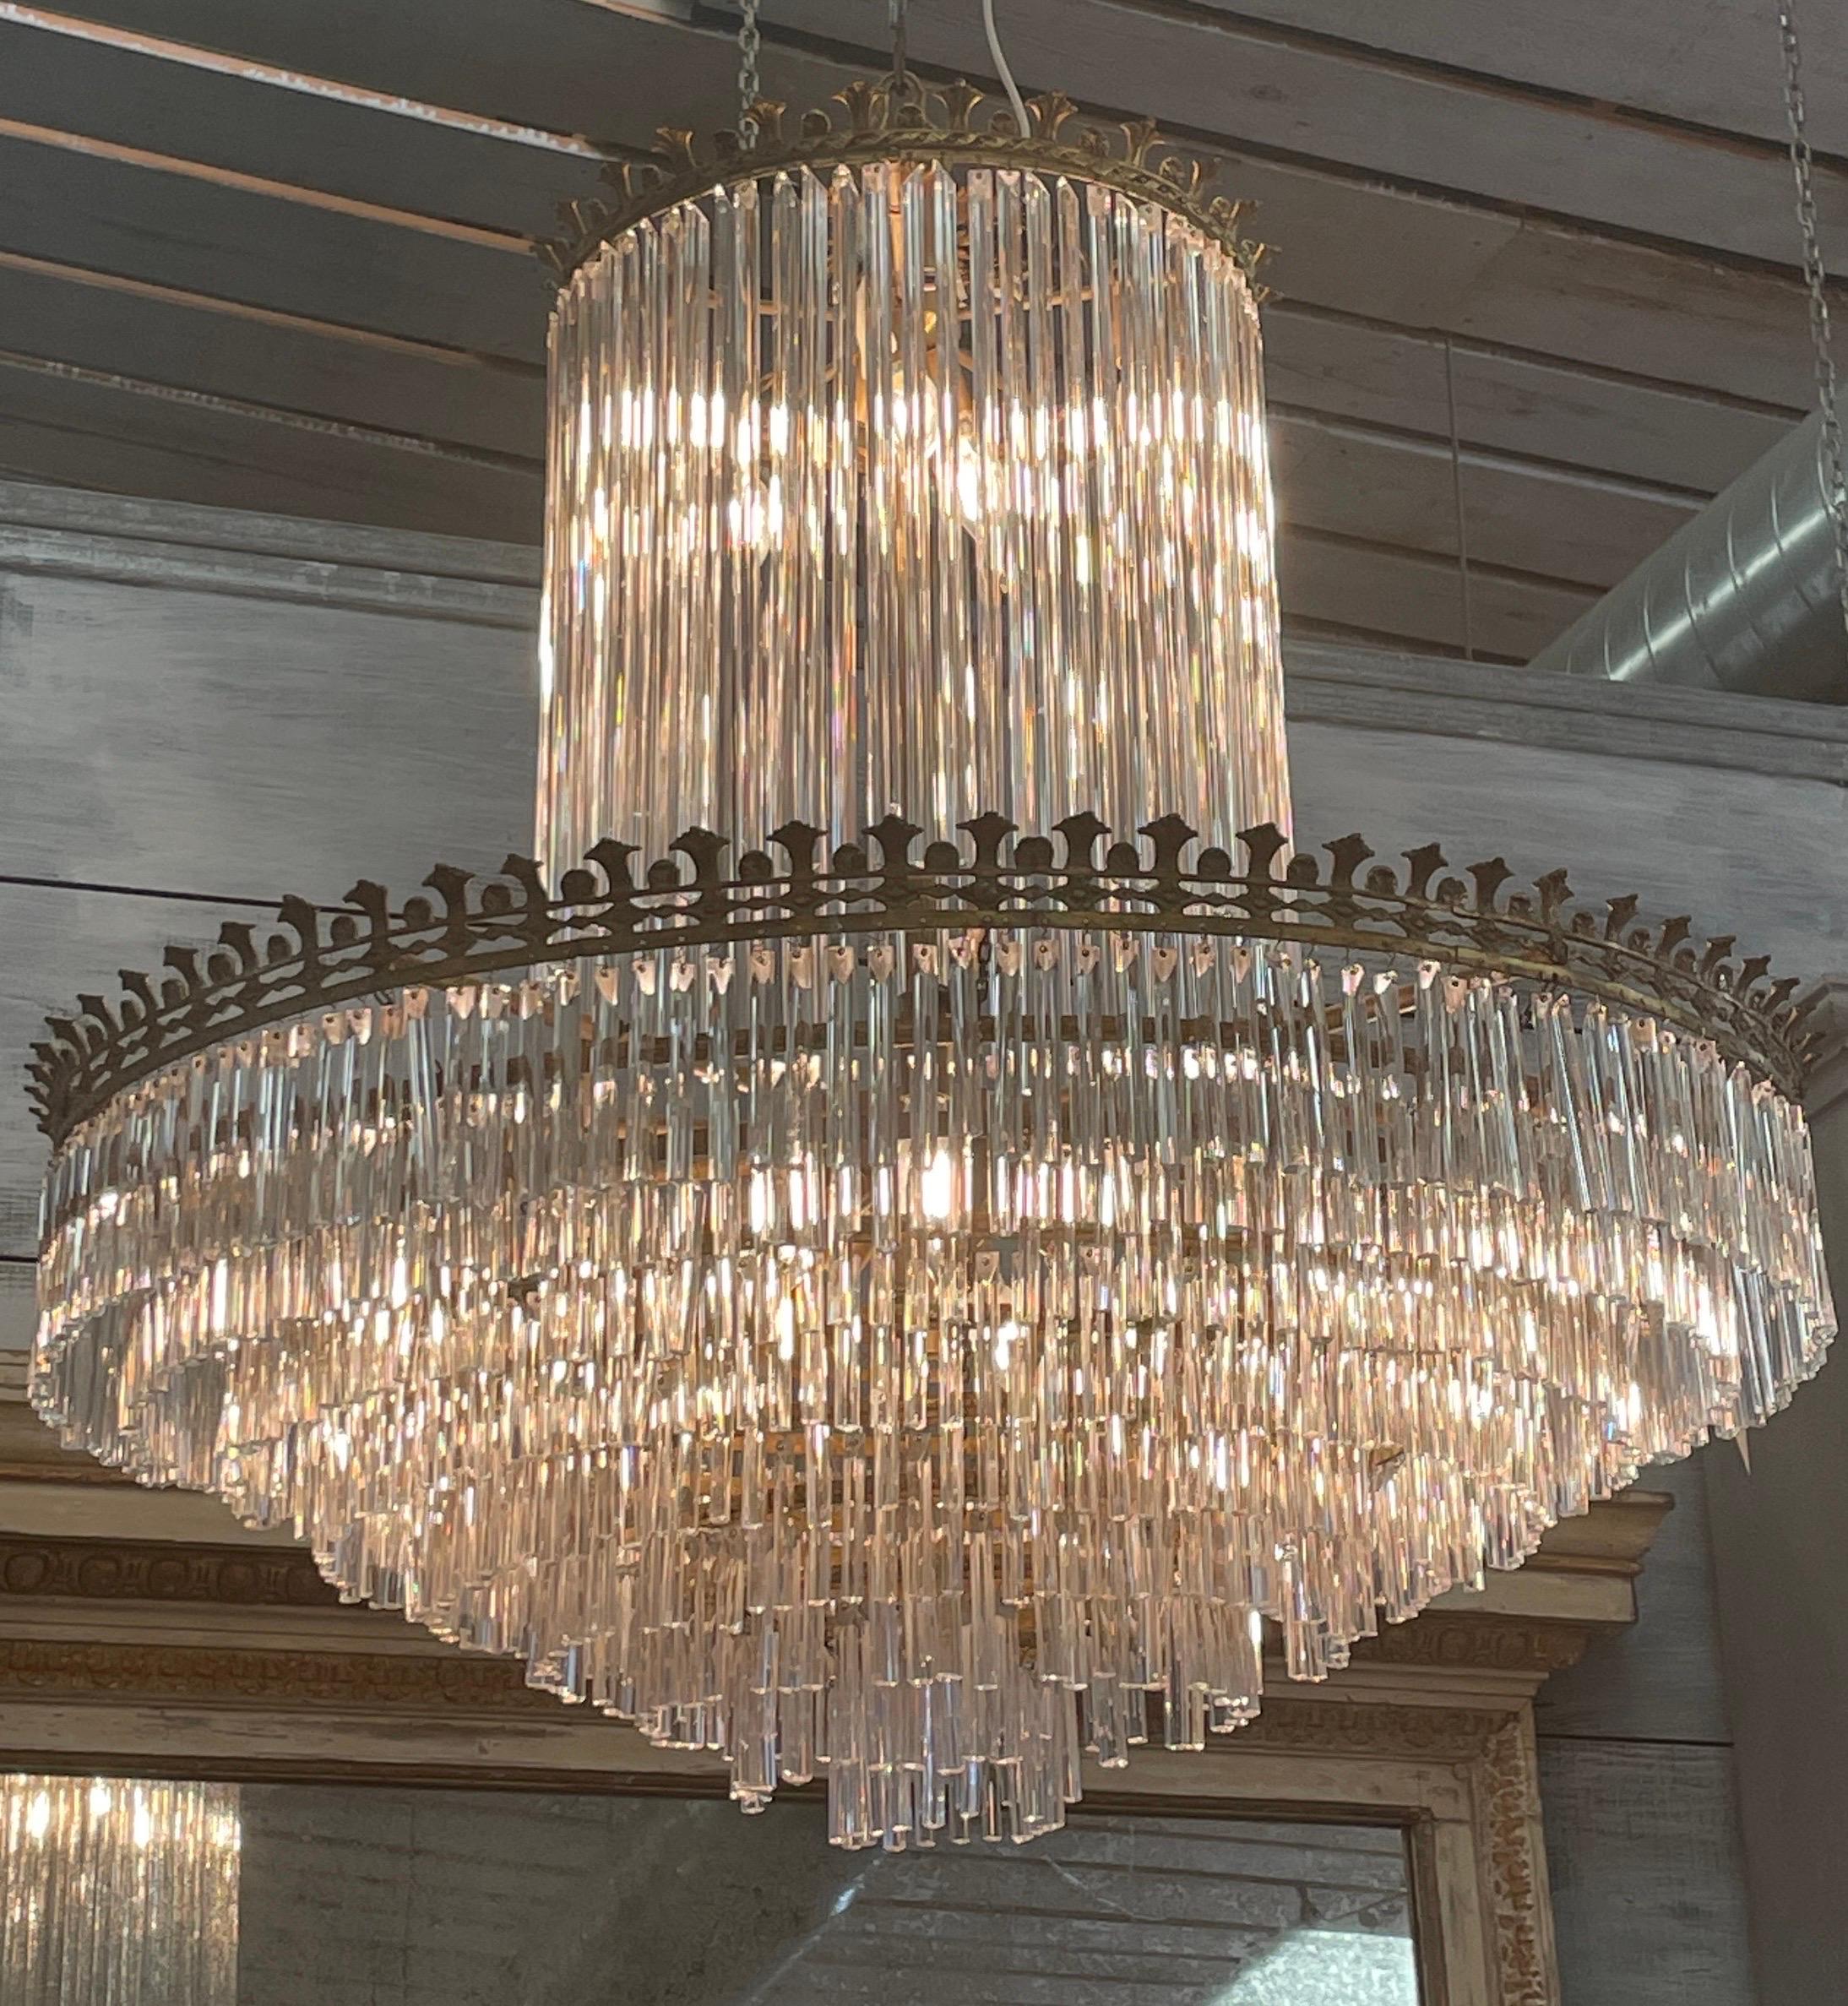 This is a gorgeous cascading crystal chandelier from the mid 1900s Spain. It’s the wow factor that makes a statement in any room.
It has some missing crystals but so full that they are hardly missed.